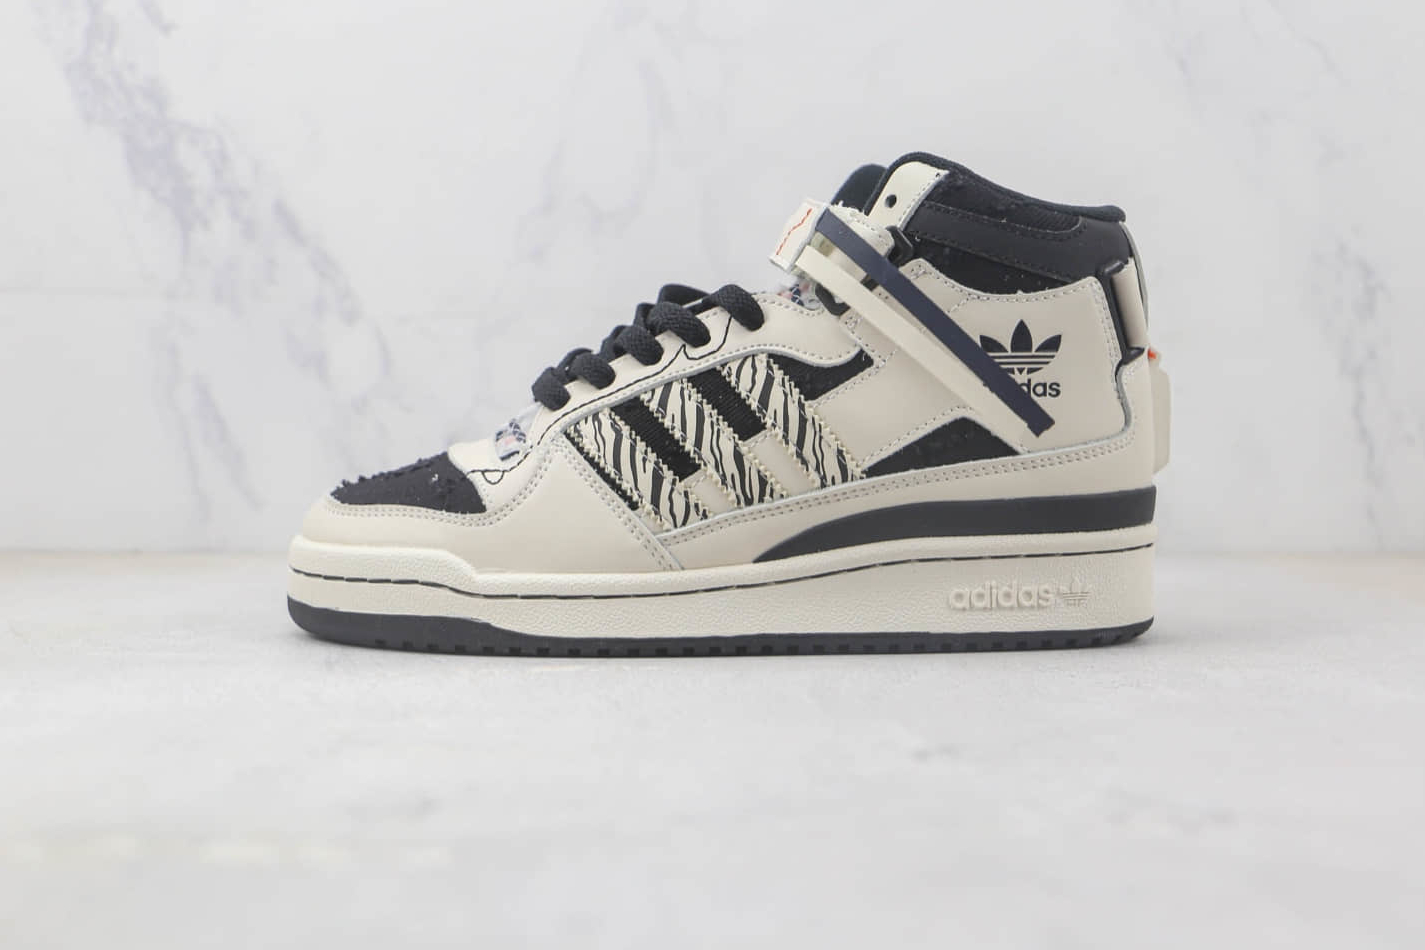 Adidas Originals Unisex Forum Mid Sneakers Creamy White/Black GX3957 - Limited Edition Sneakers